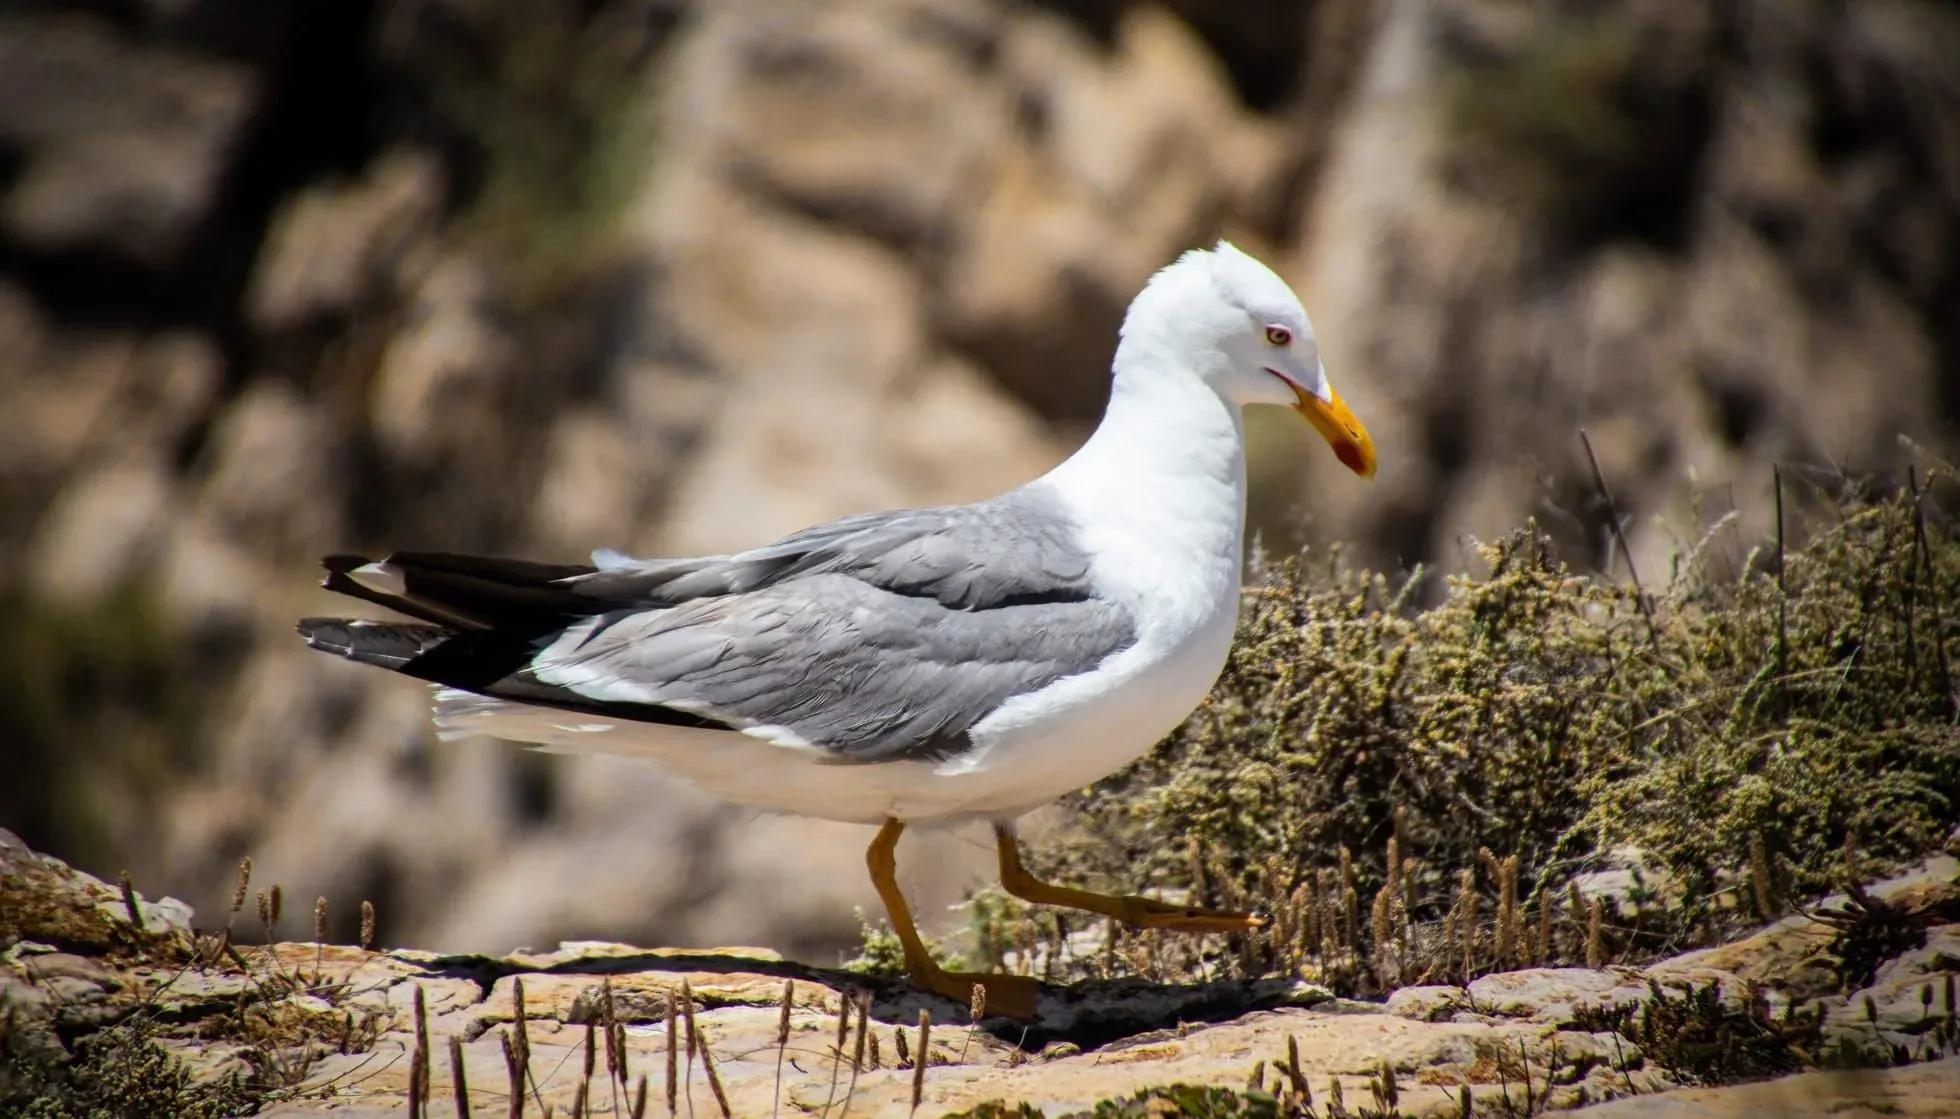 The Pacific Gull